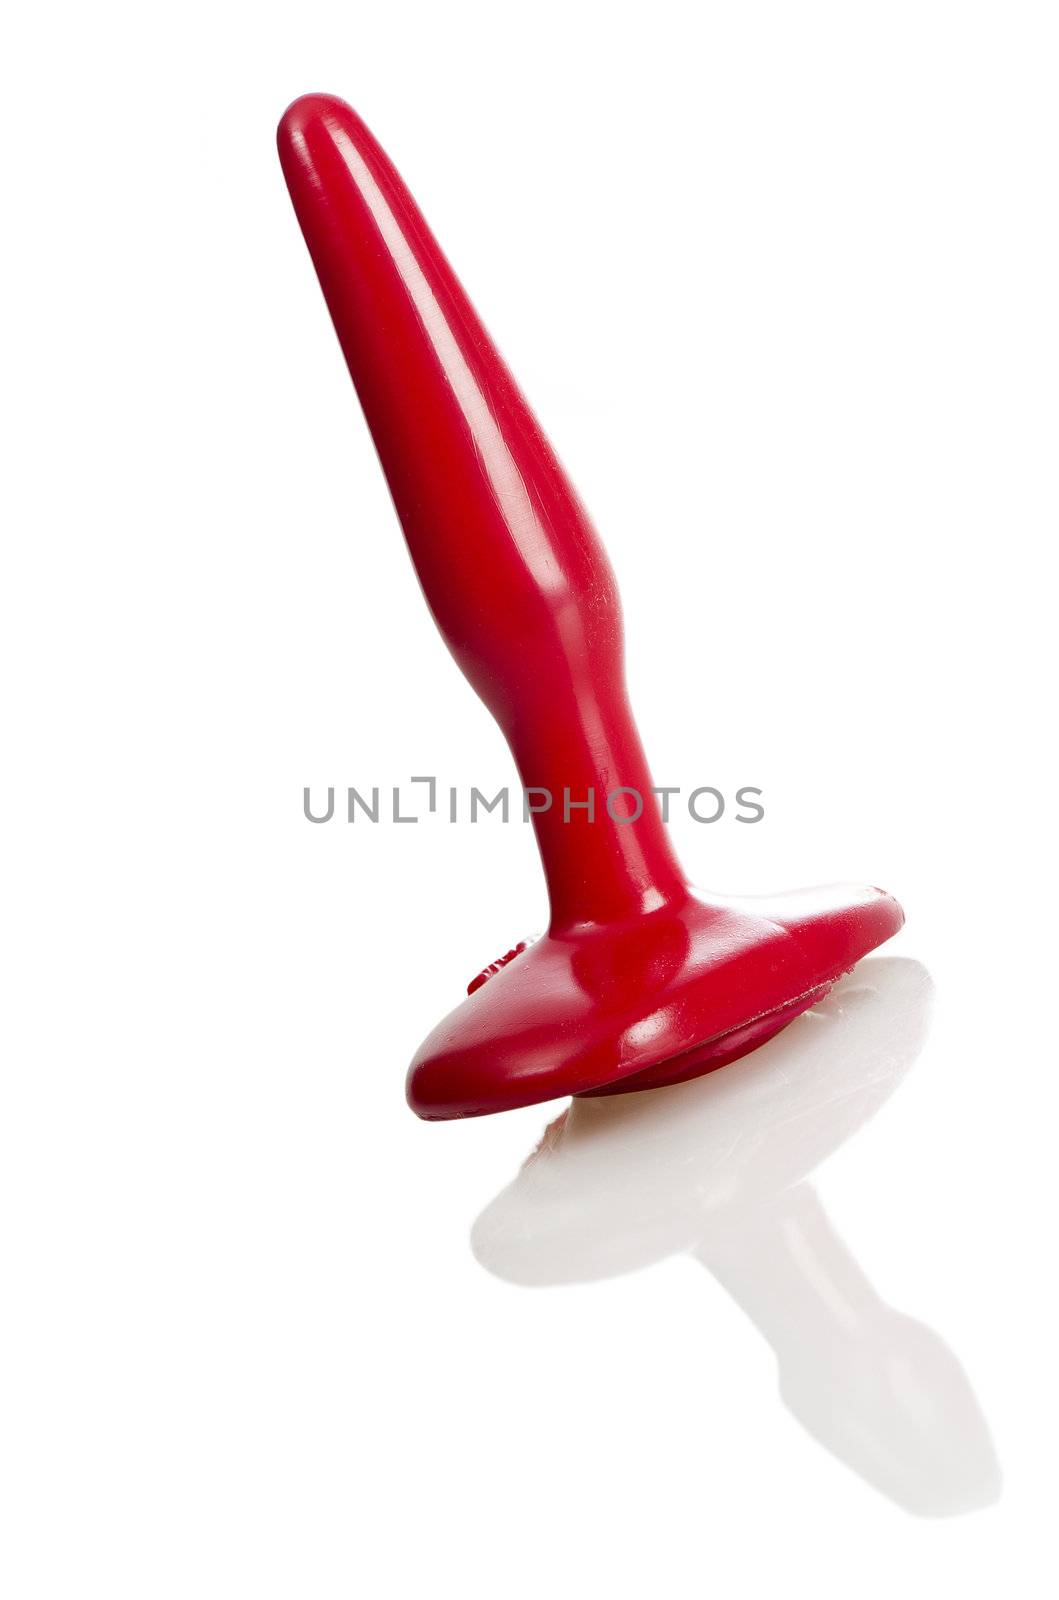 A red sex toy (anal plug) made of rubber/latex, isolated on white.